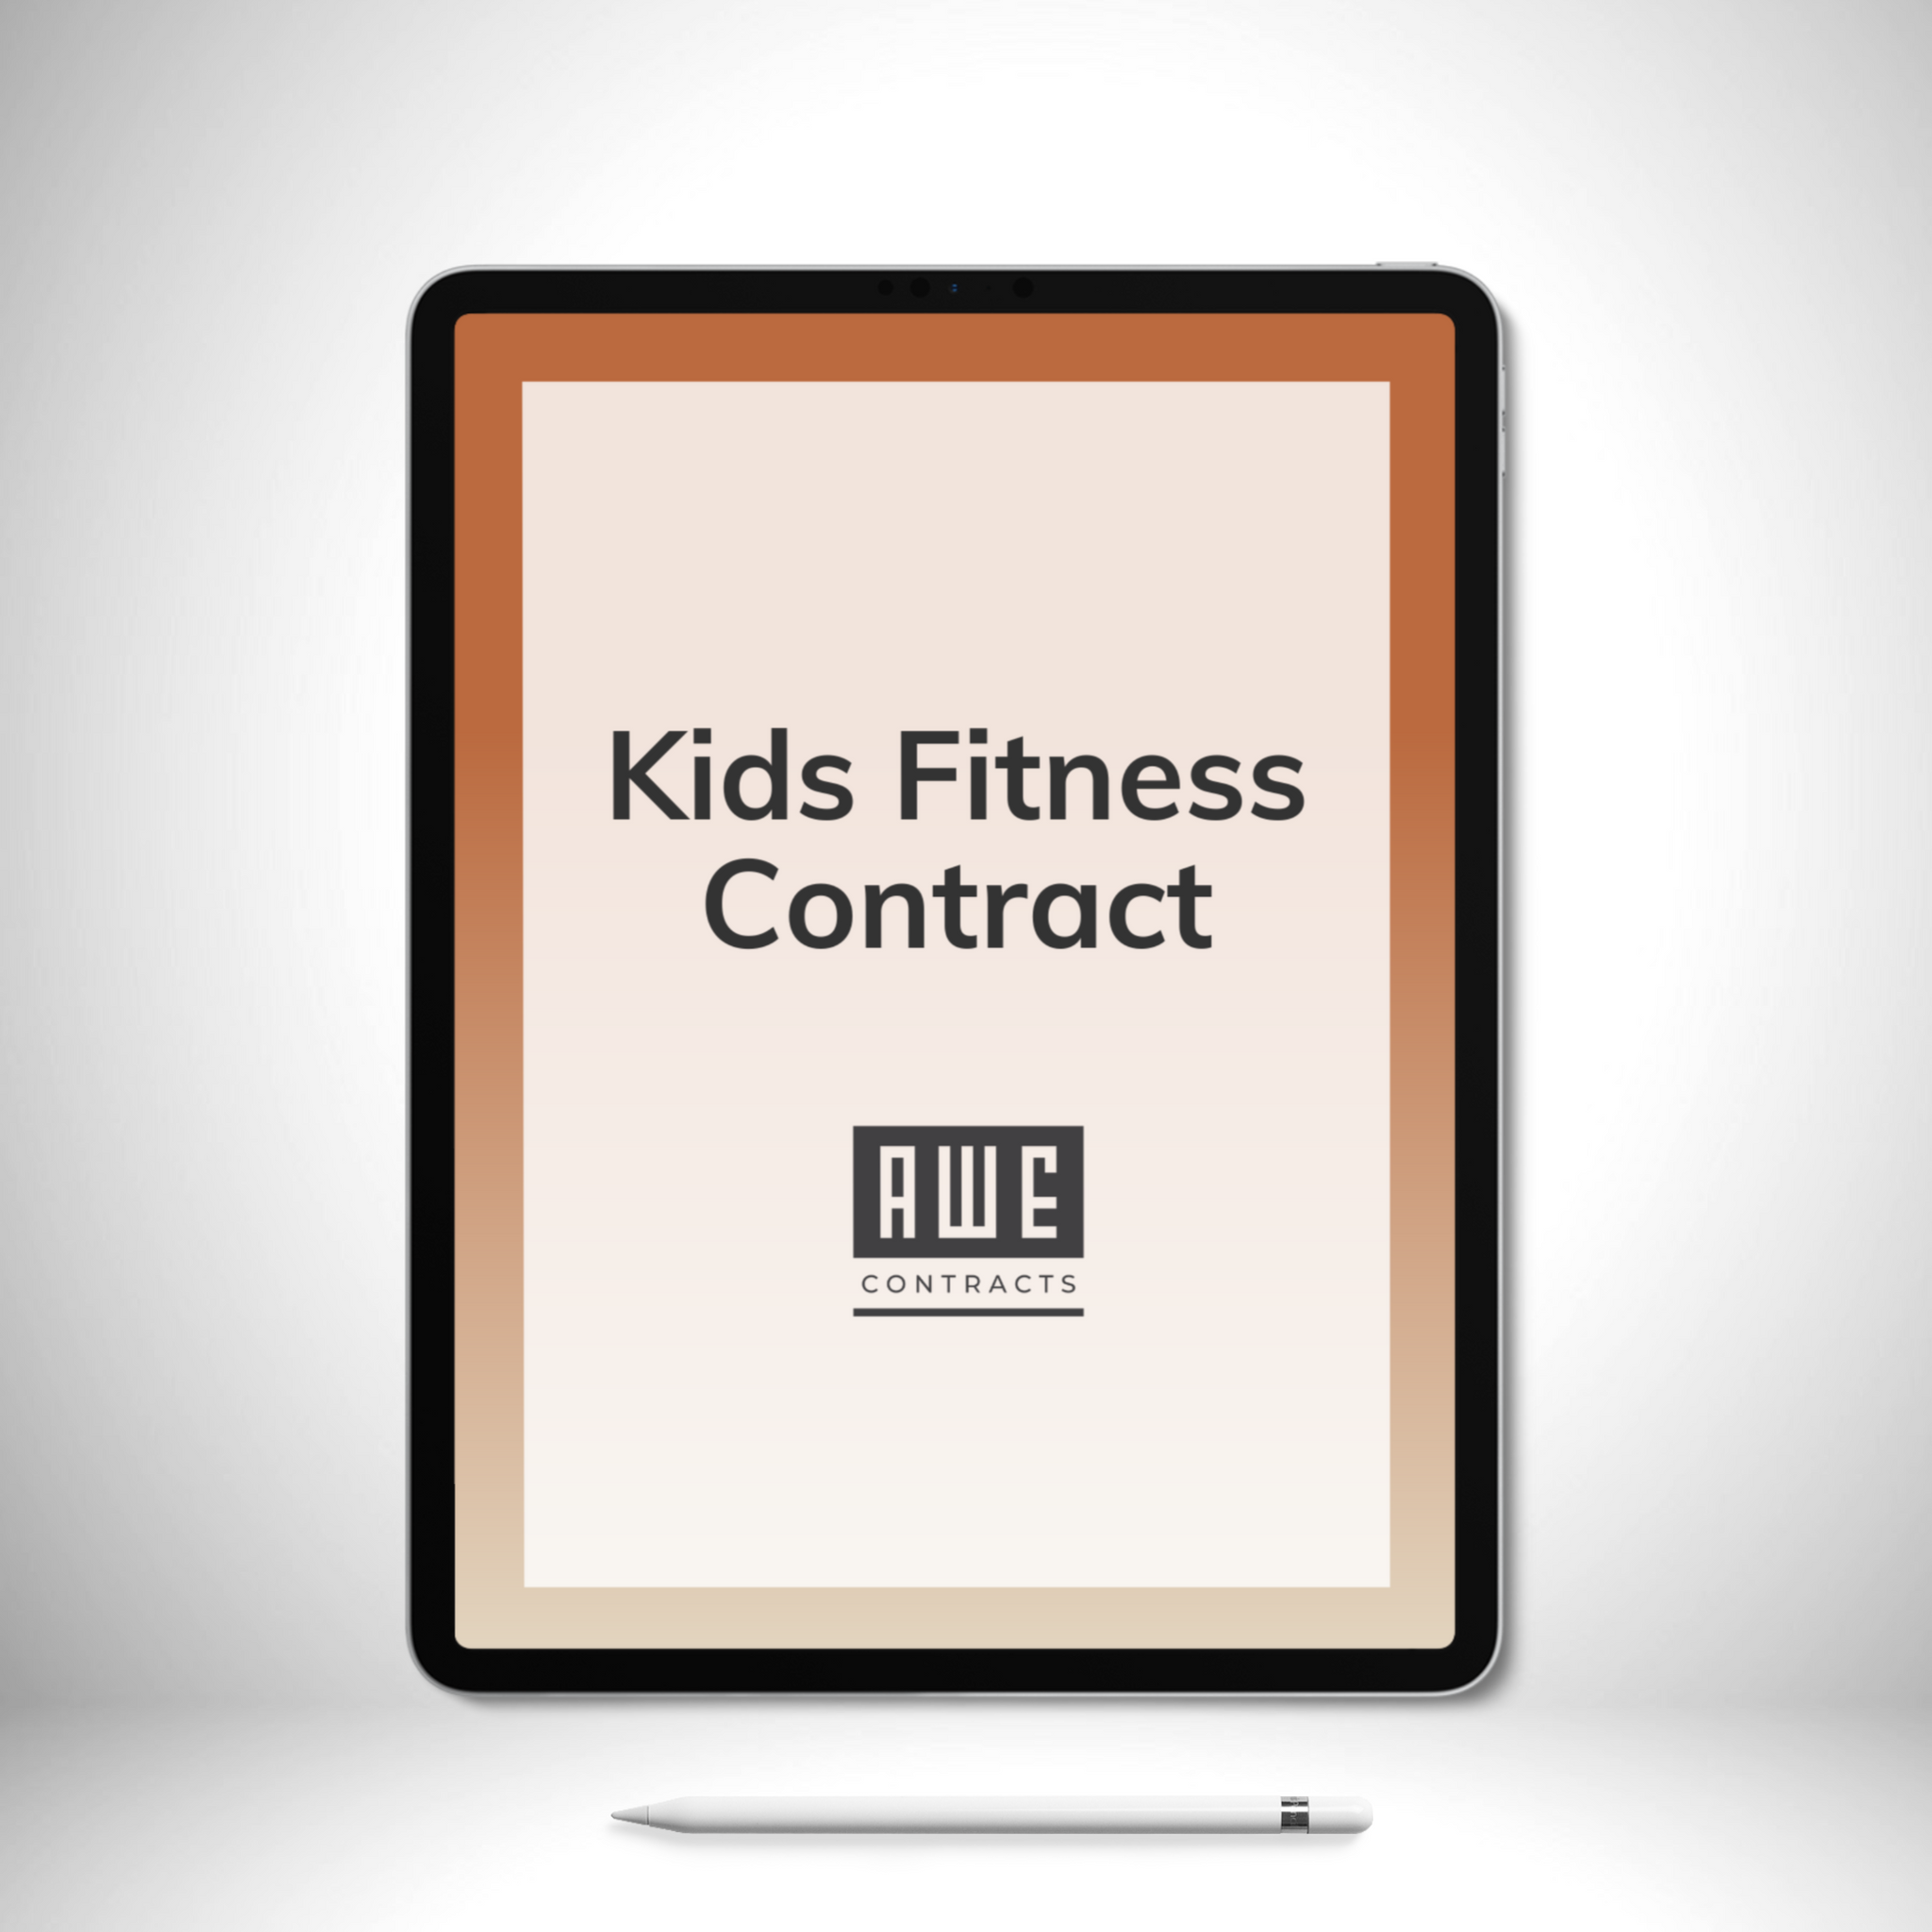 Kids Fitness Contract